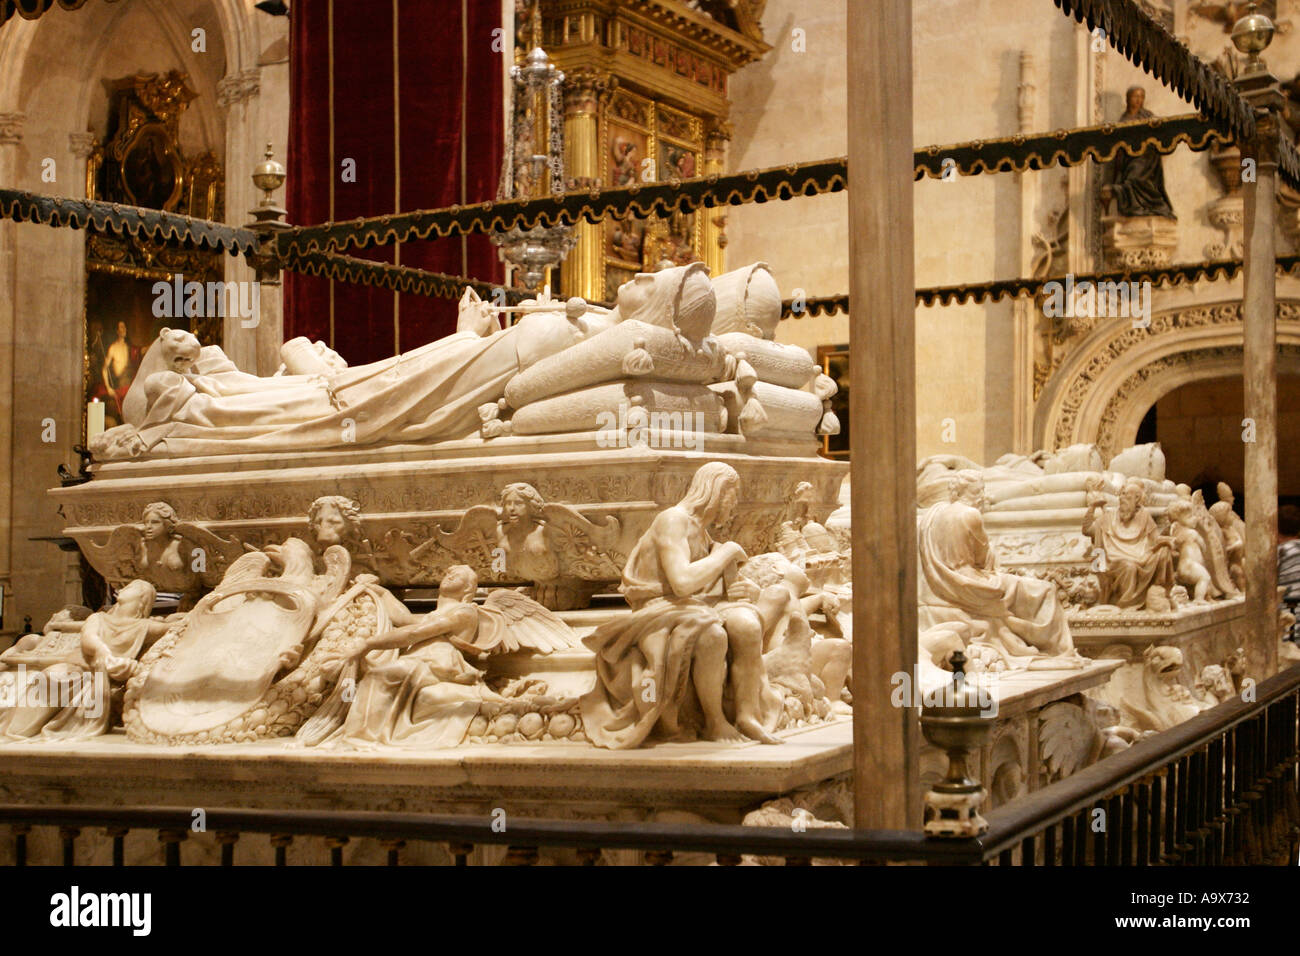 Granada Andalusia Spain sepulchre of the Catholic Monarchs in the Royal Chapel Stock Photo